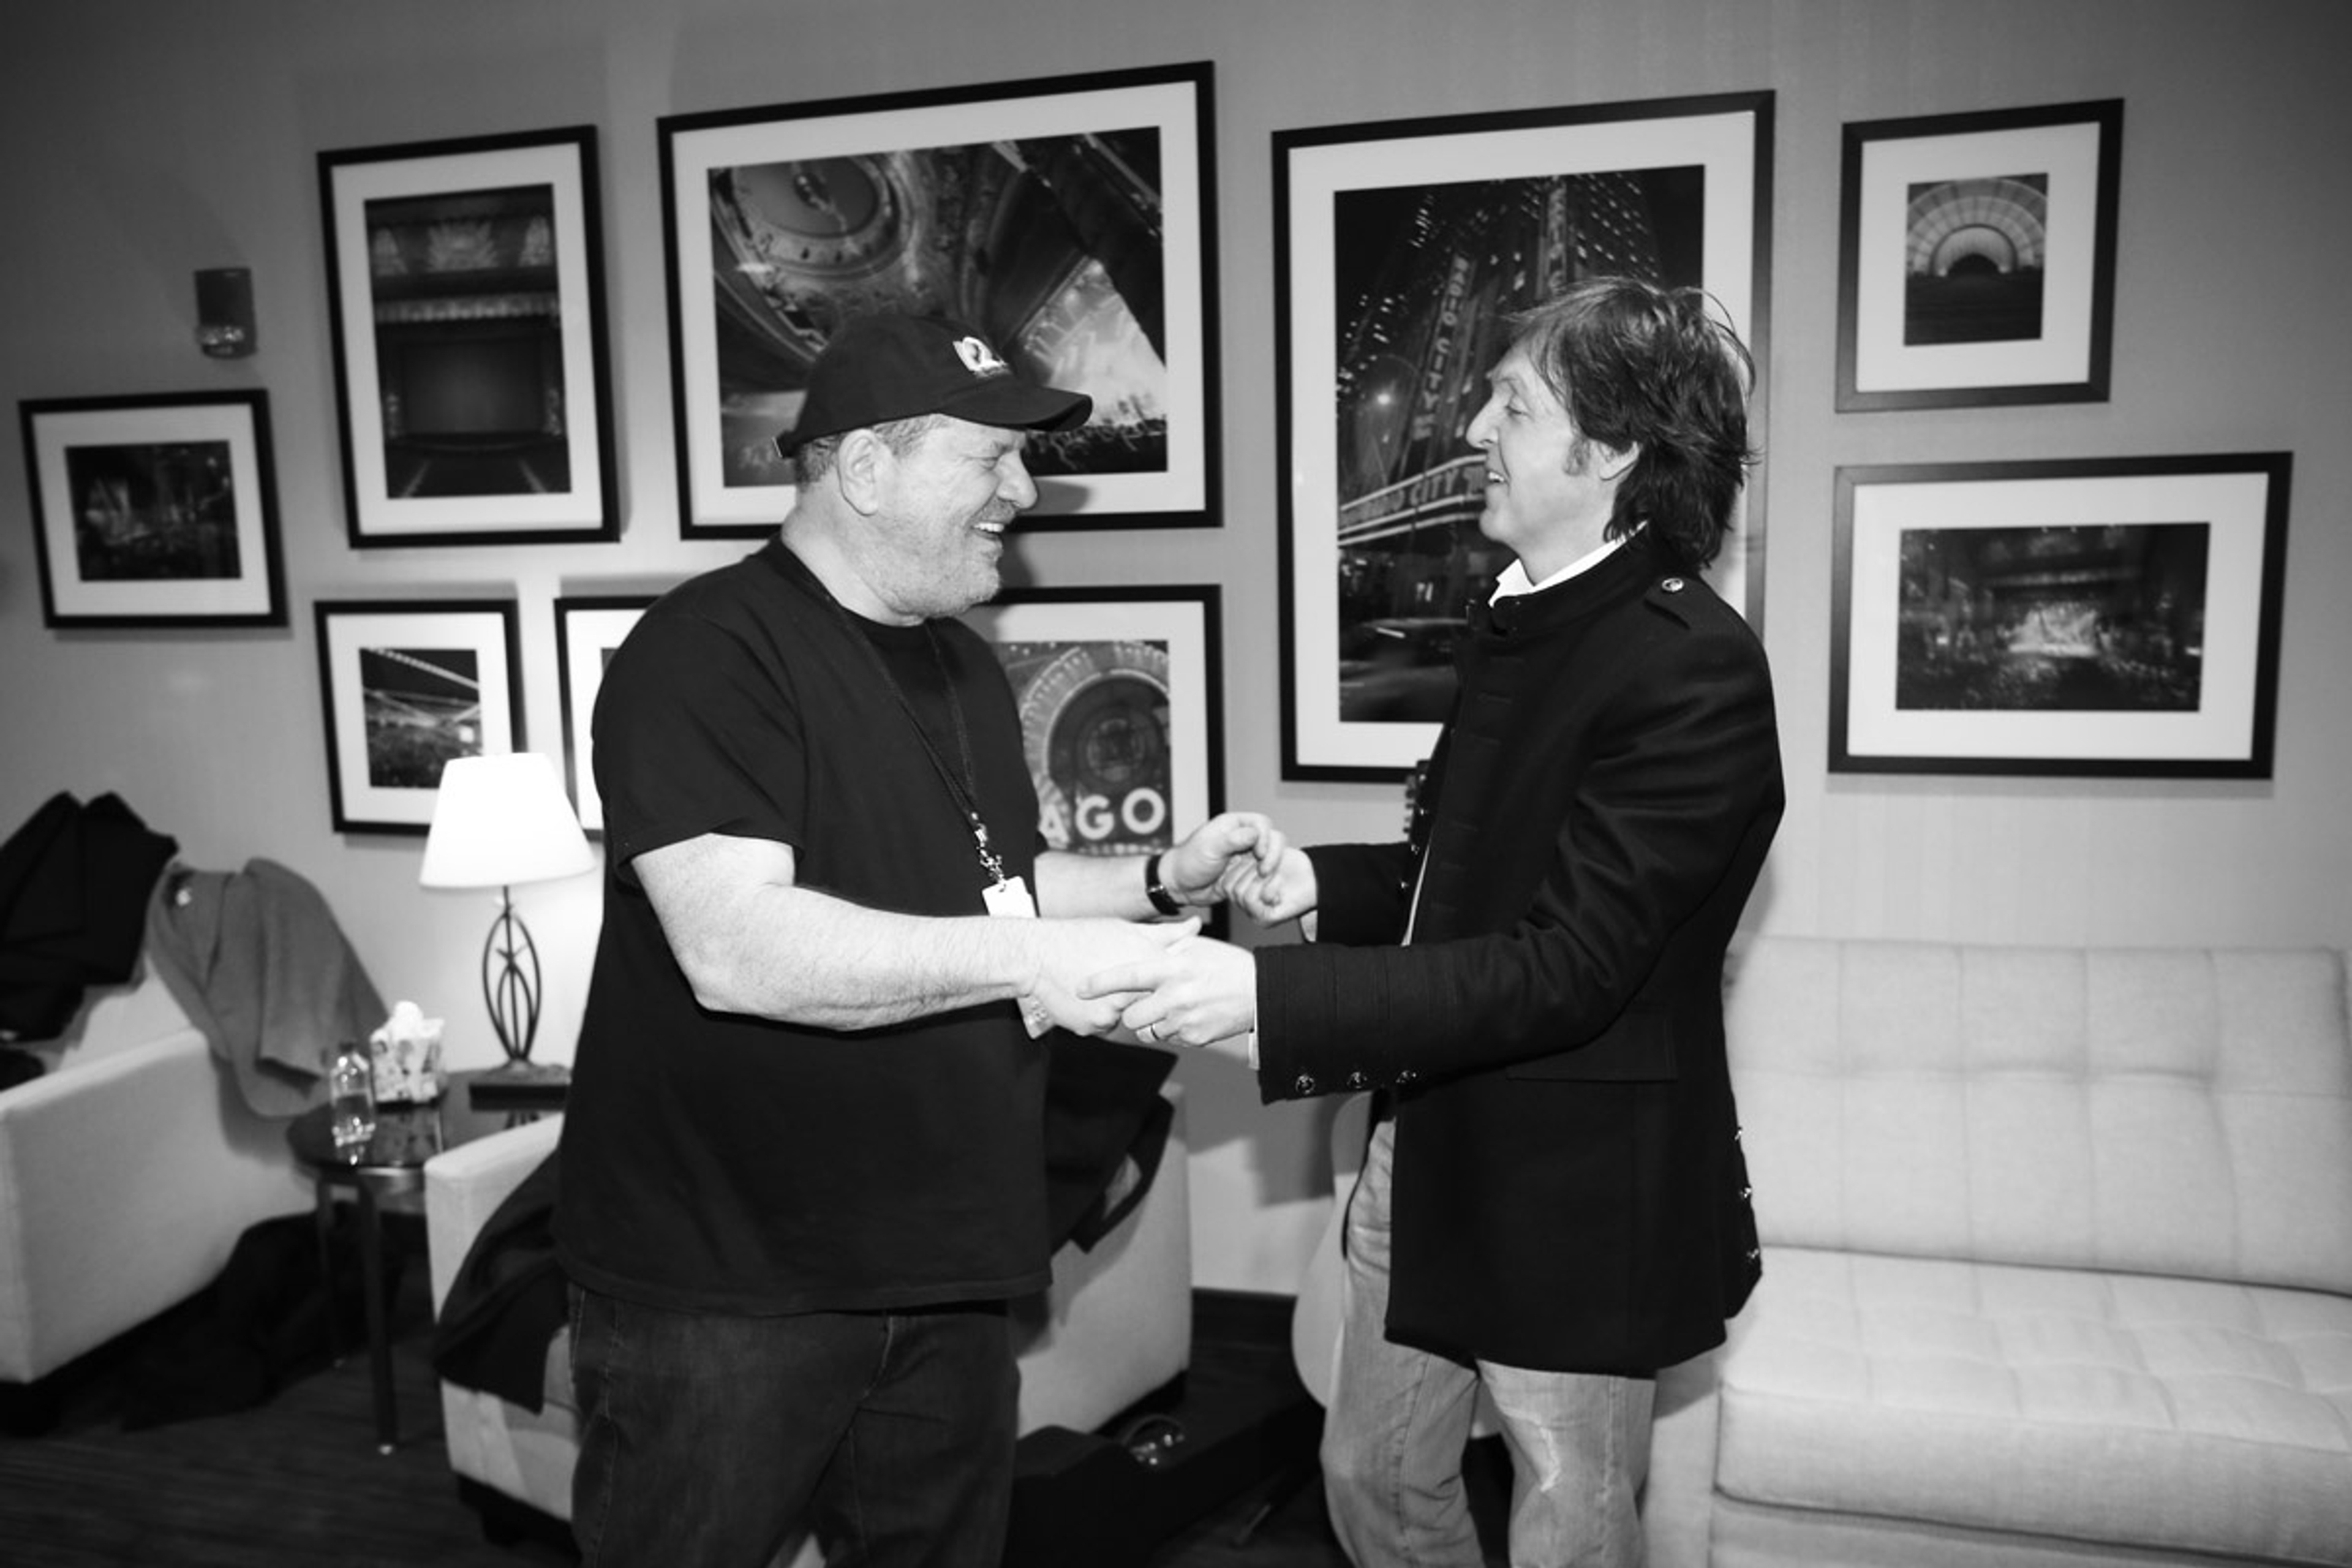 Paul backstage with Harvey Weinstein, 12-12-12 Hurricane Sandy Benefit, Madison Square Garden, NYC, 12th December 2012